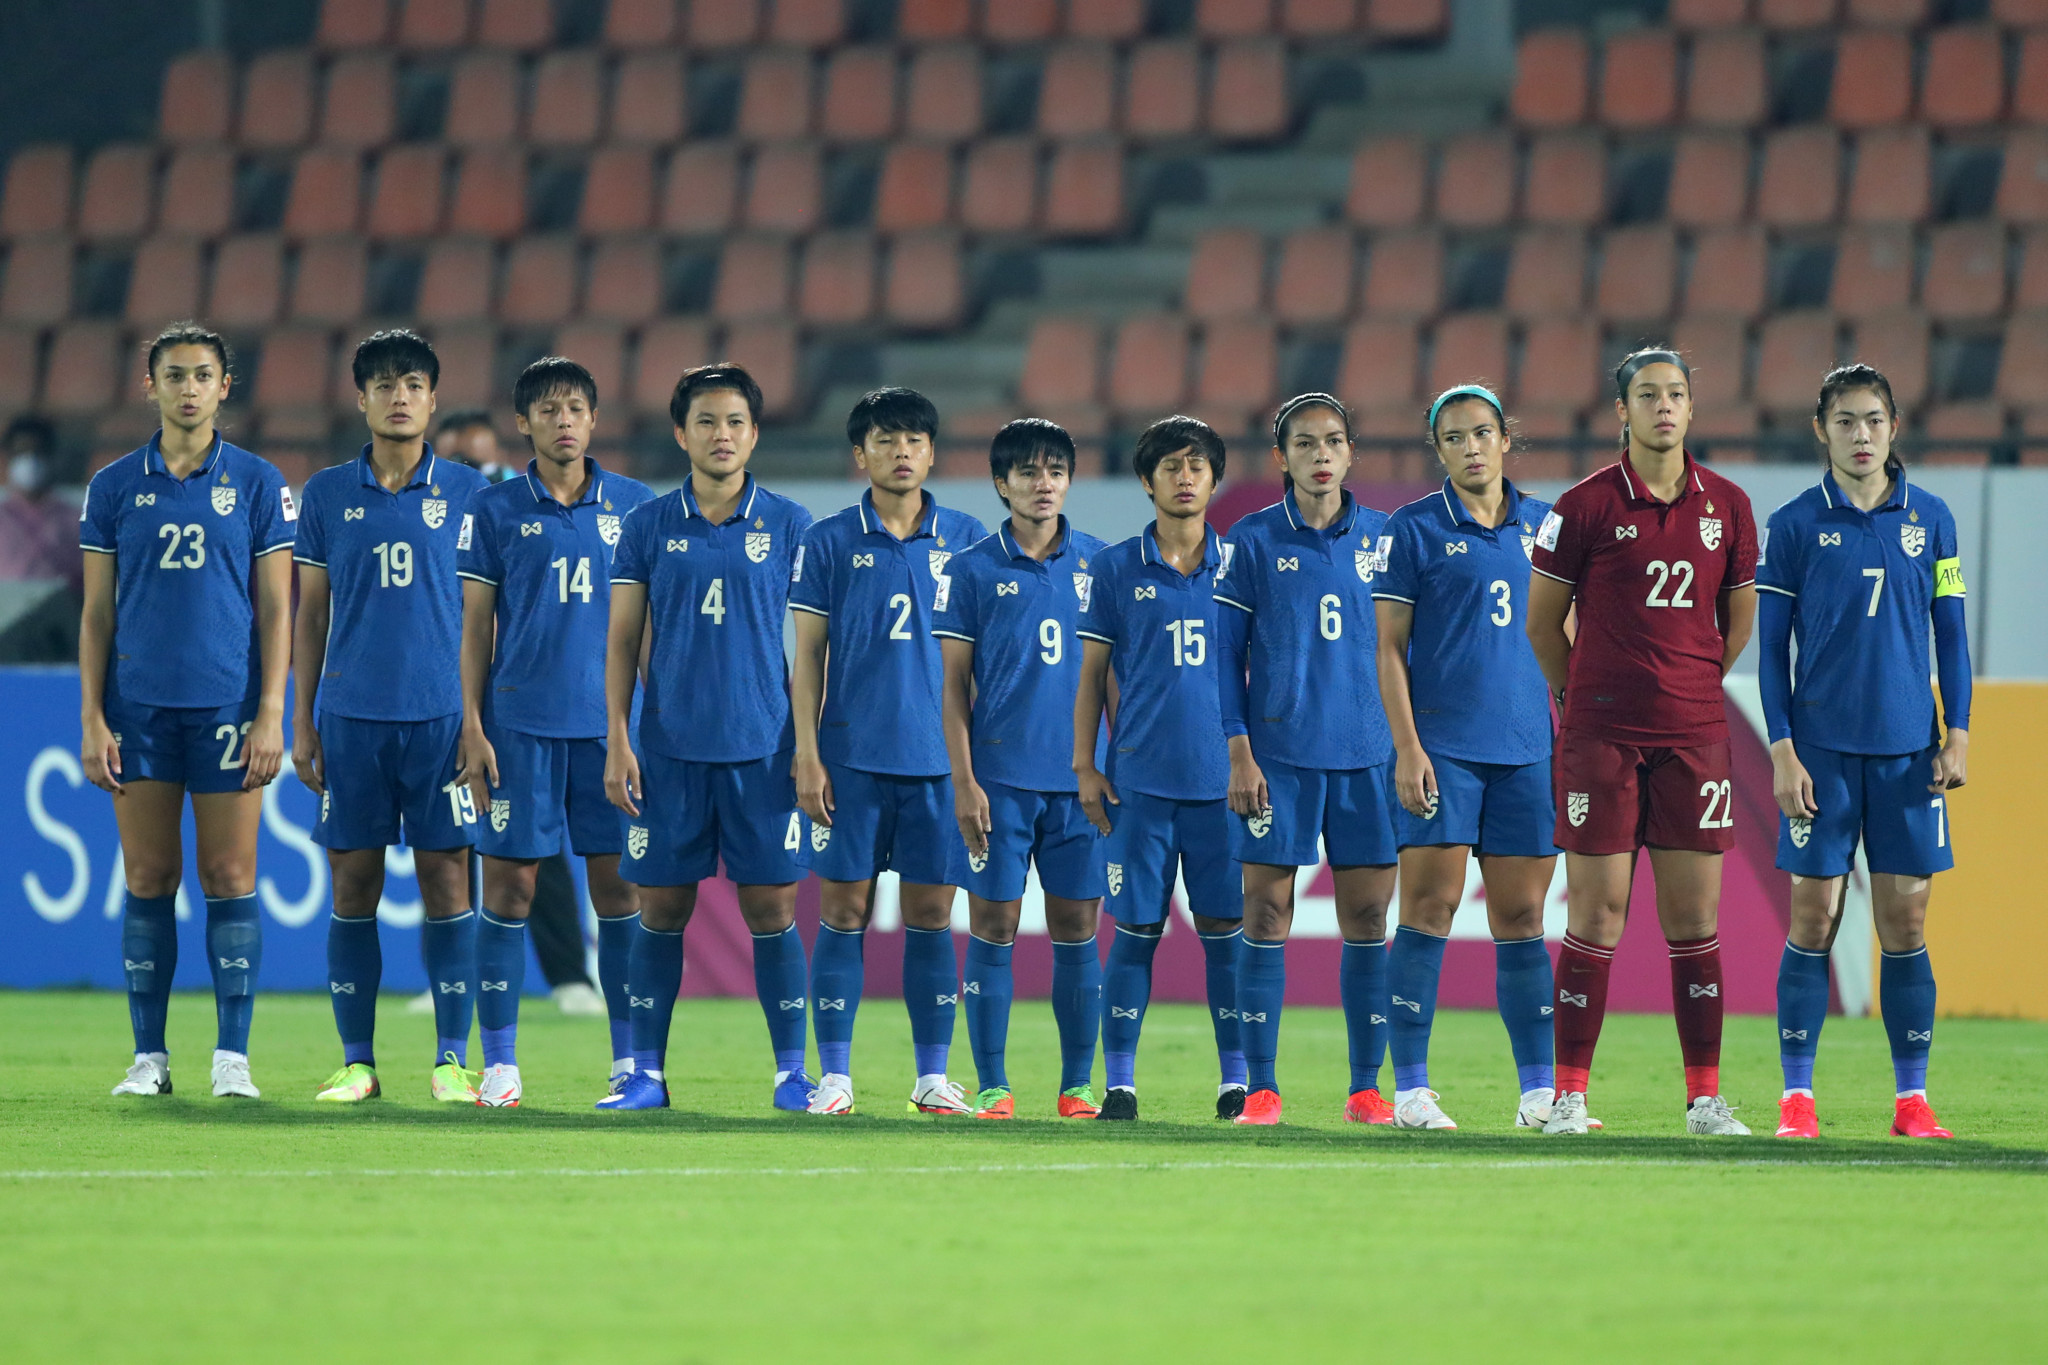 Thailand beat the Philippines 1-0 to join the hosts in the semi-finals of the AFF Women's Championship ©Getty Images